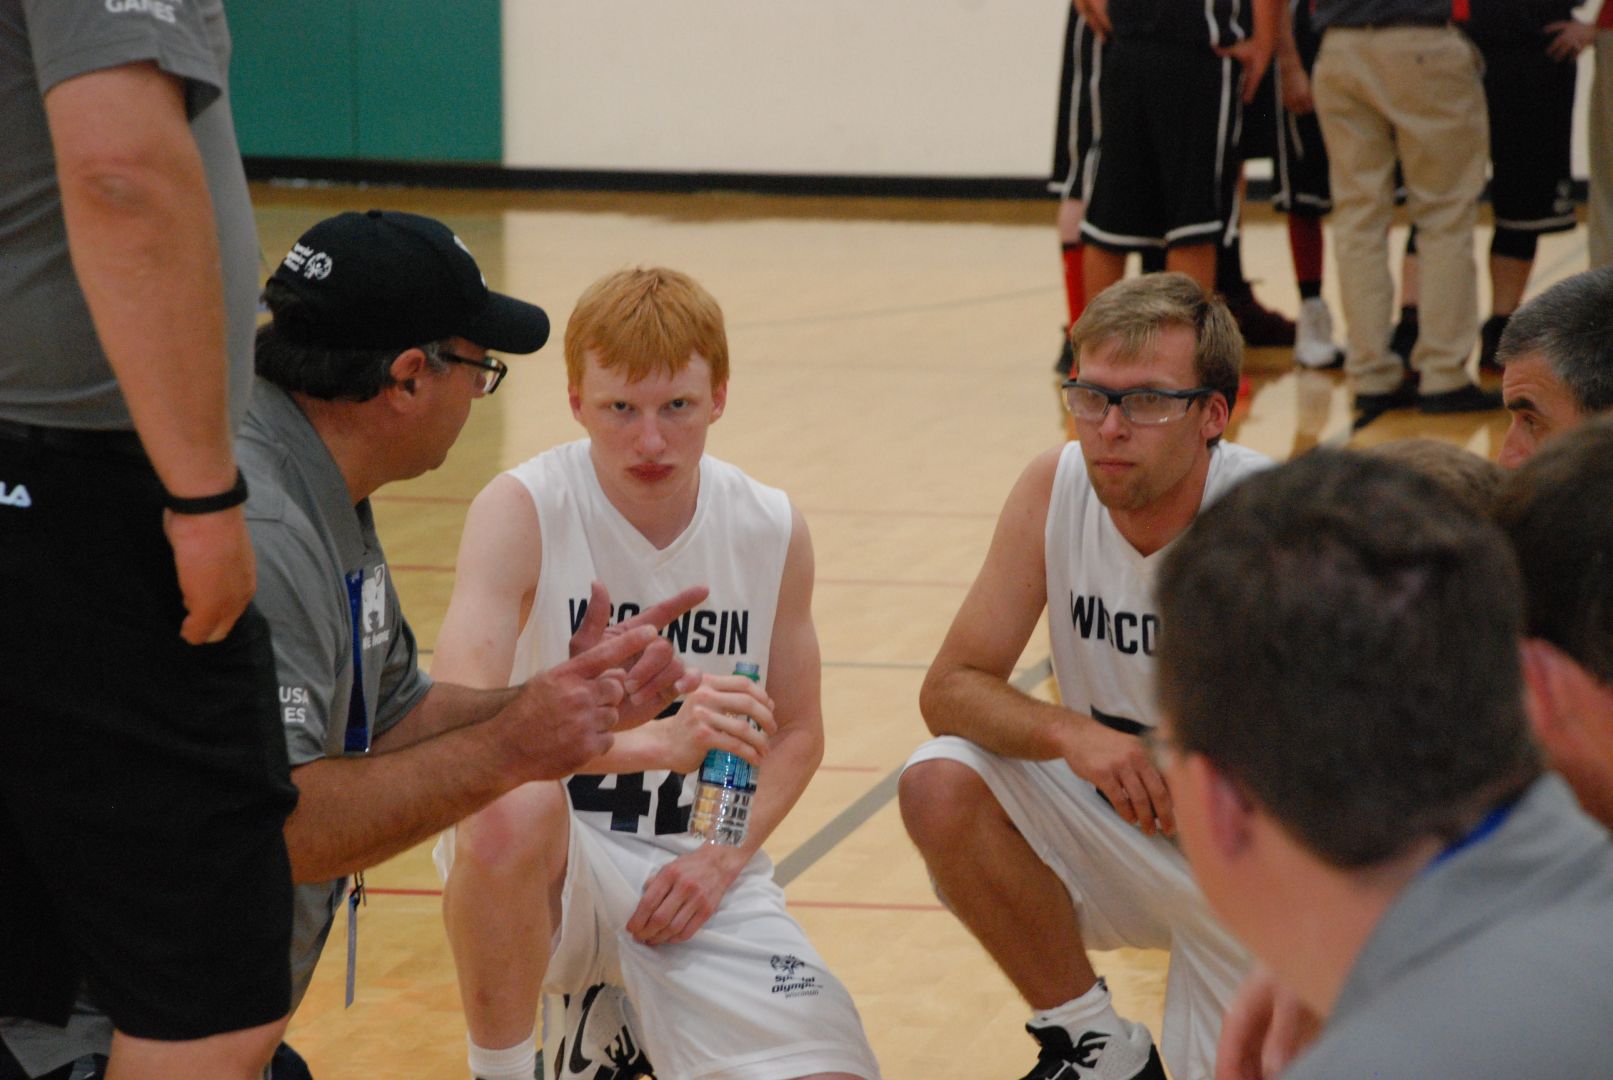 Zach Meinholz (AKA "The Mosquito") listens intensely as Coach Scott Galston gives pointers on how to defend Washington's size